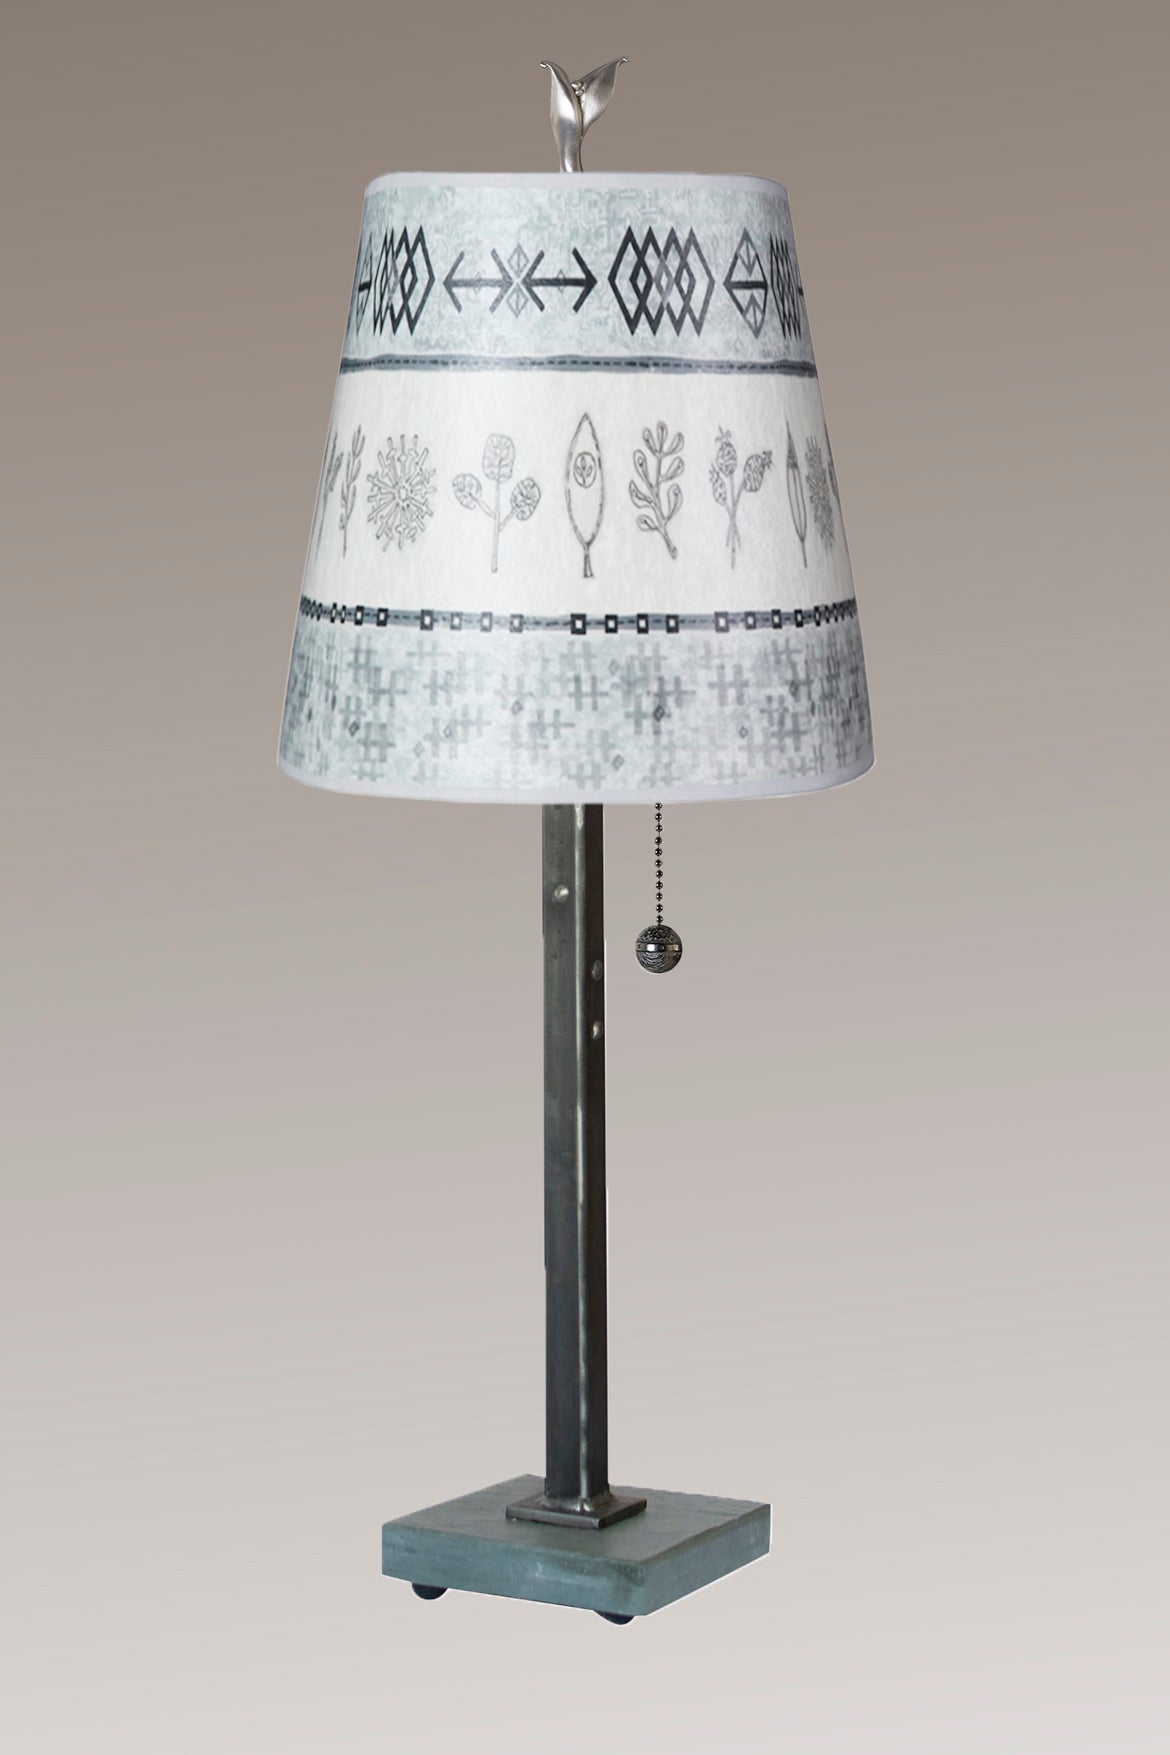 Janna Ugone &amp; Co Table Lamps Steel Table Lamp with Small Drum Shade in Woven &amp; Sprig in Mist